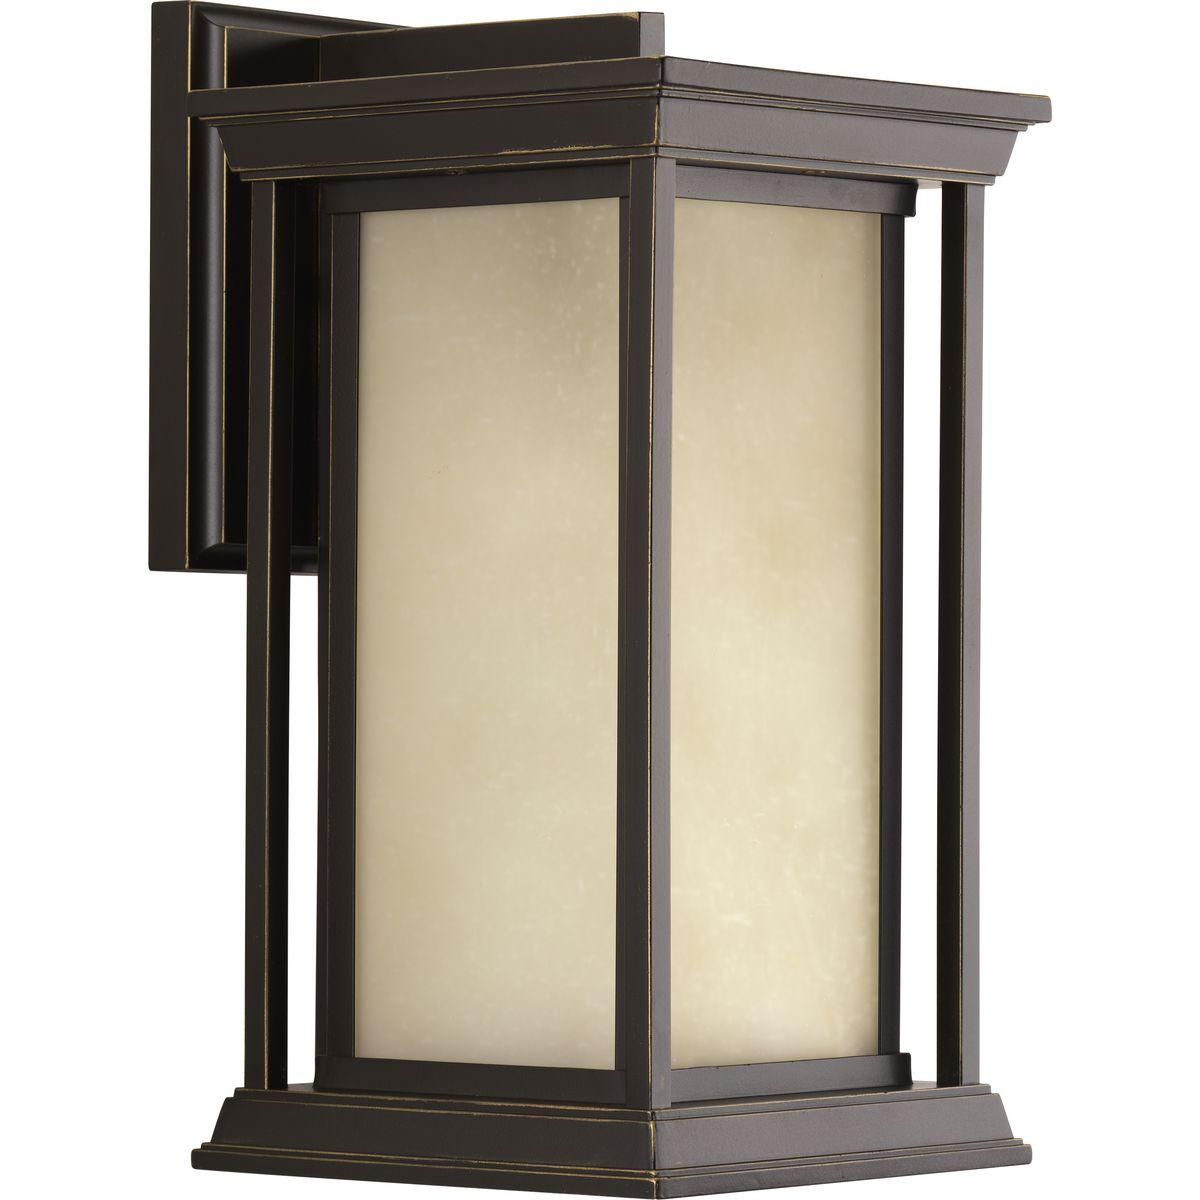 Hubbell P5610-20 One-light medium wall lantern with a Craftsman-inspired modern silhouette, Endicott offers visual interest when both lit and unlit. The elongated frame is elegantly finished with linen glass diffuser.  ; Craftsman-inspired modern silhouette. ; Visually ap